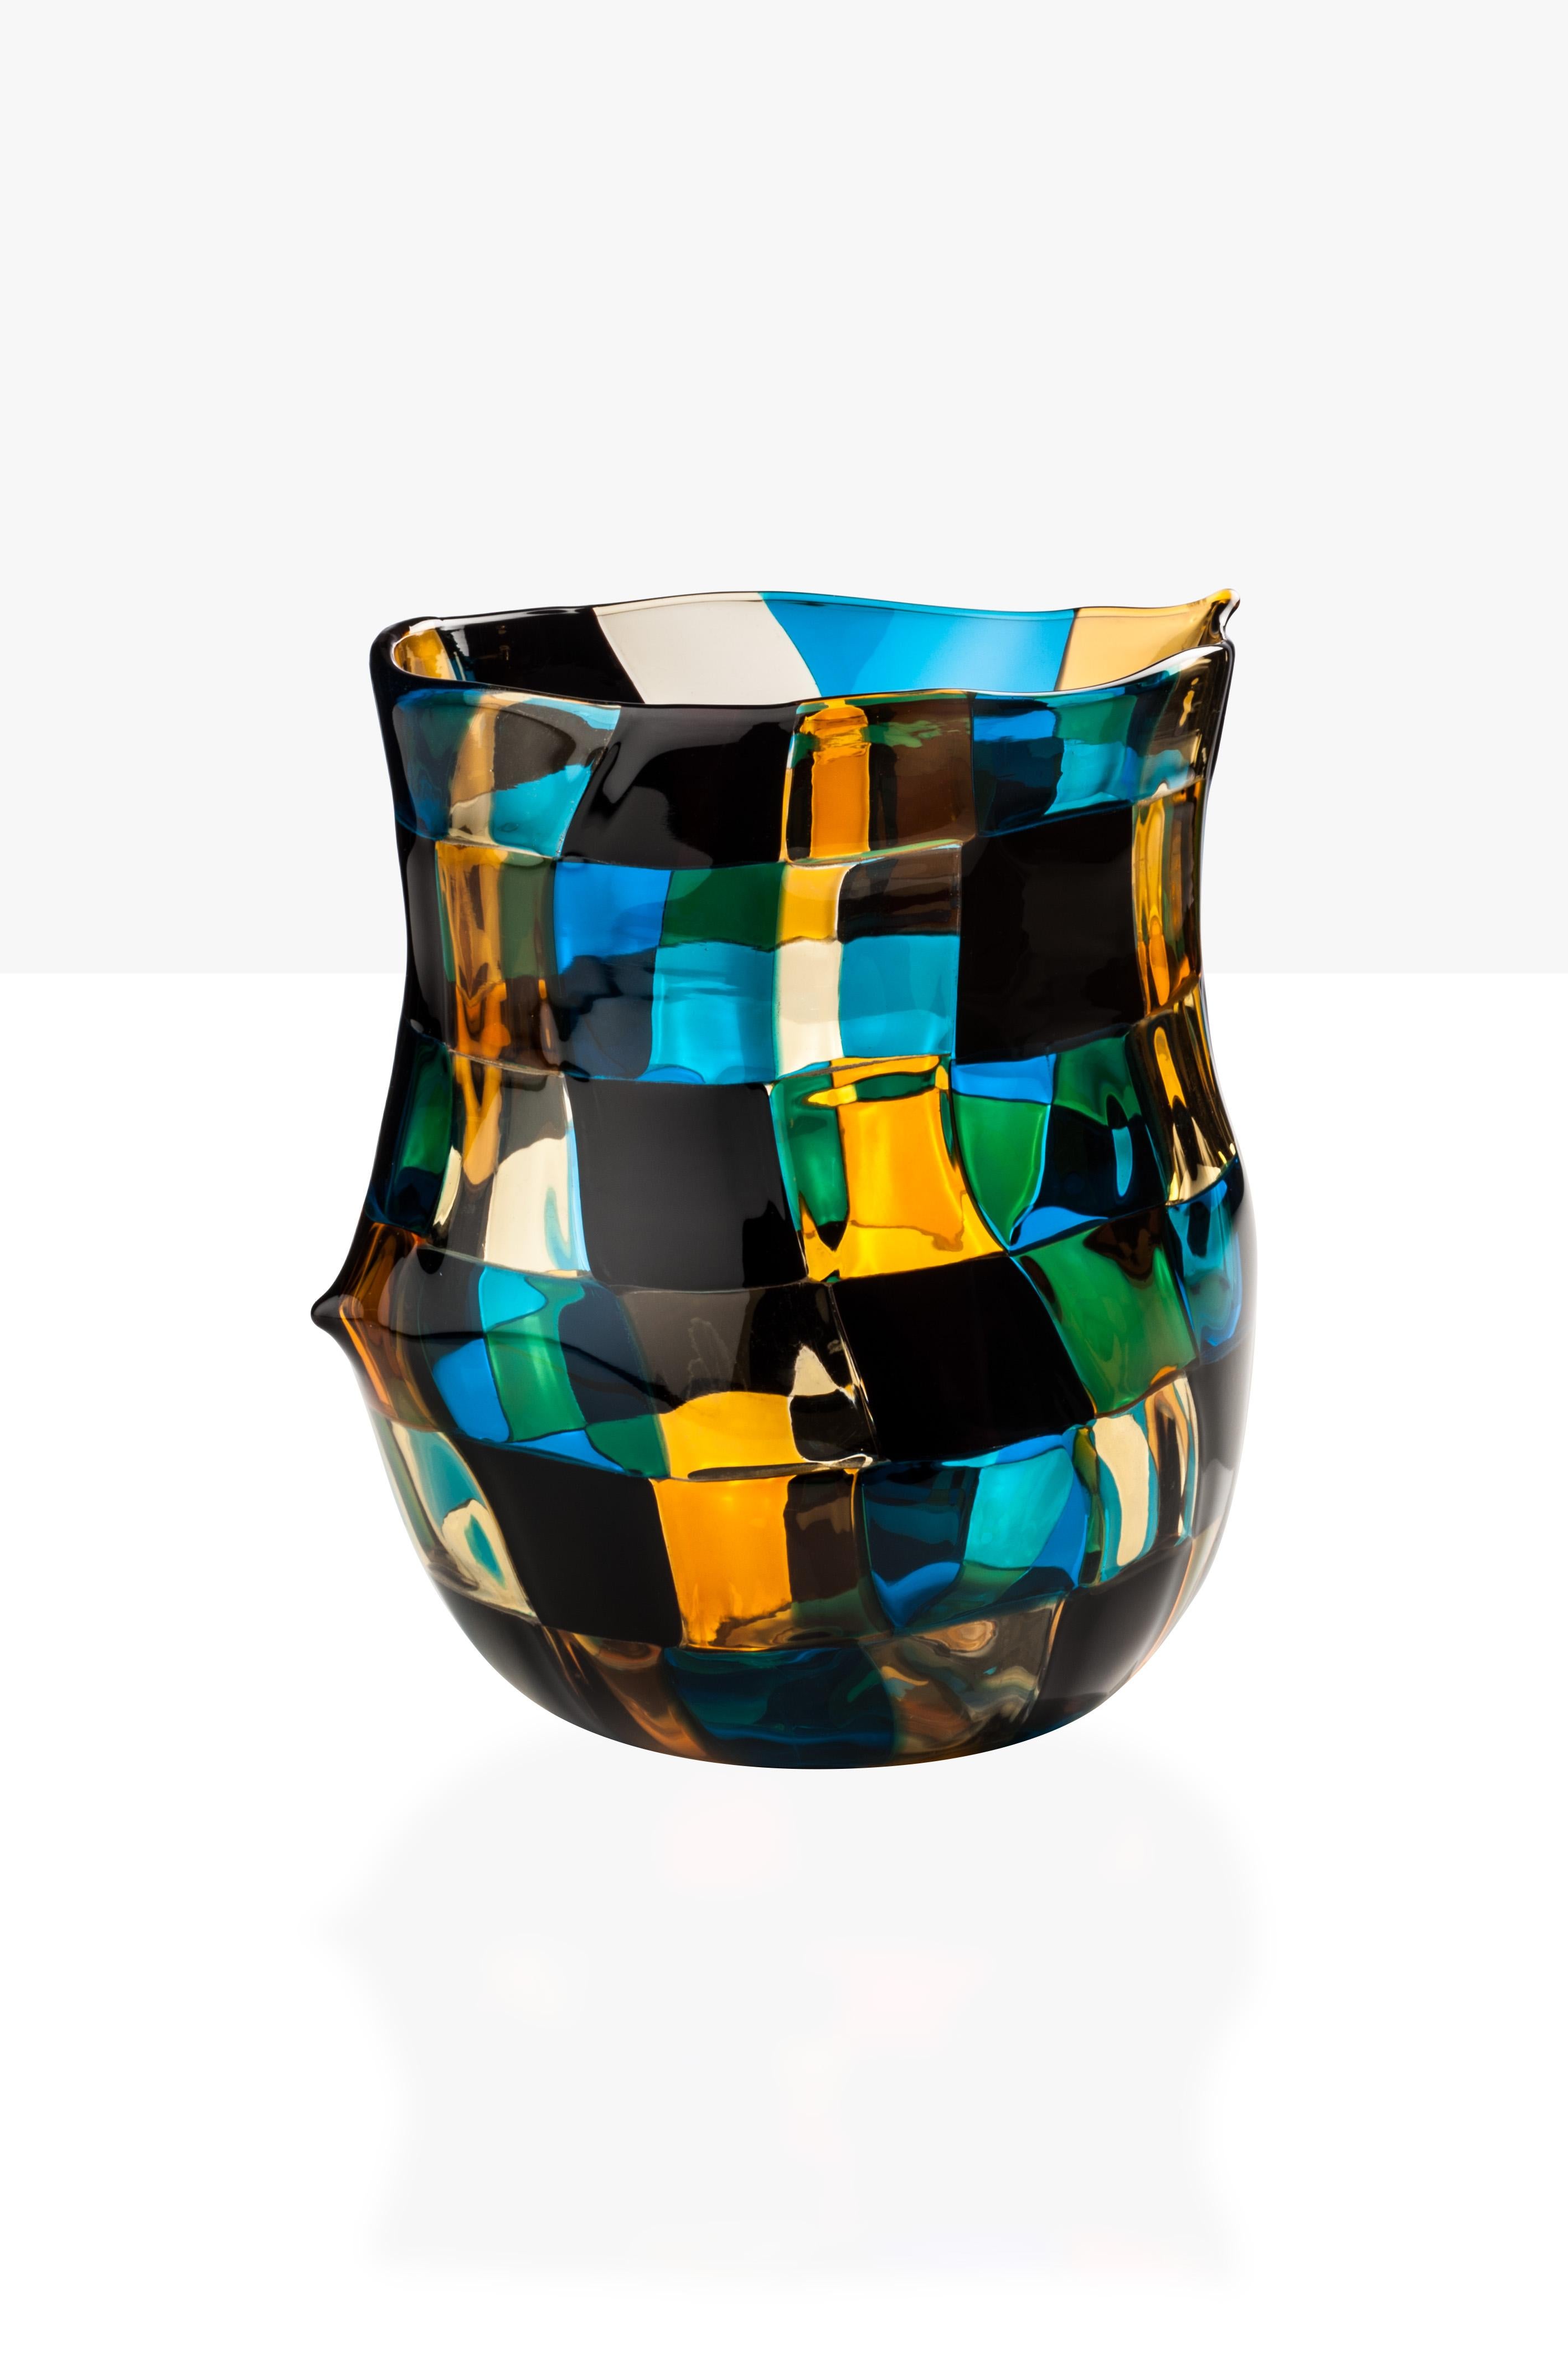 Pezzati glass vase, designed by Fulvio and manufactured by Bianconi, features a blown handmade glass vases with multicolored “Tessere”. Originally designed in 1950. Limited edition of 49 art pieces.

Dimensions: Ø 16 cm, H 20 cm.